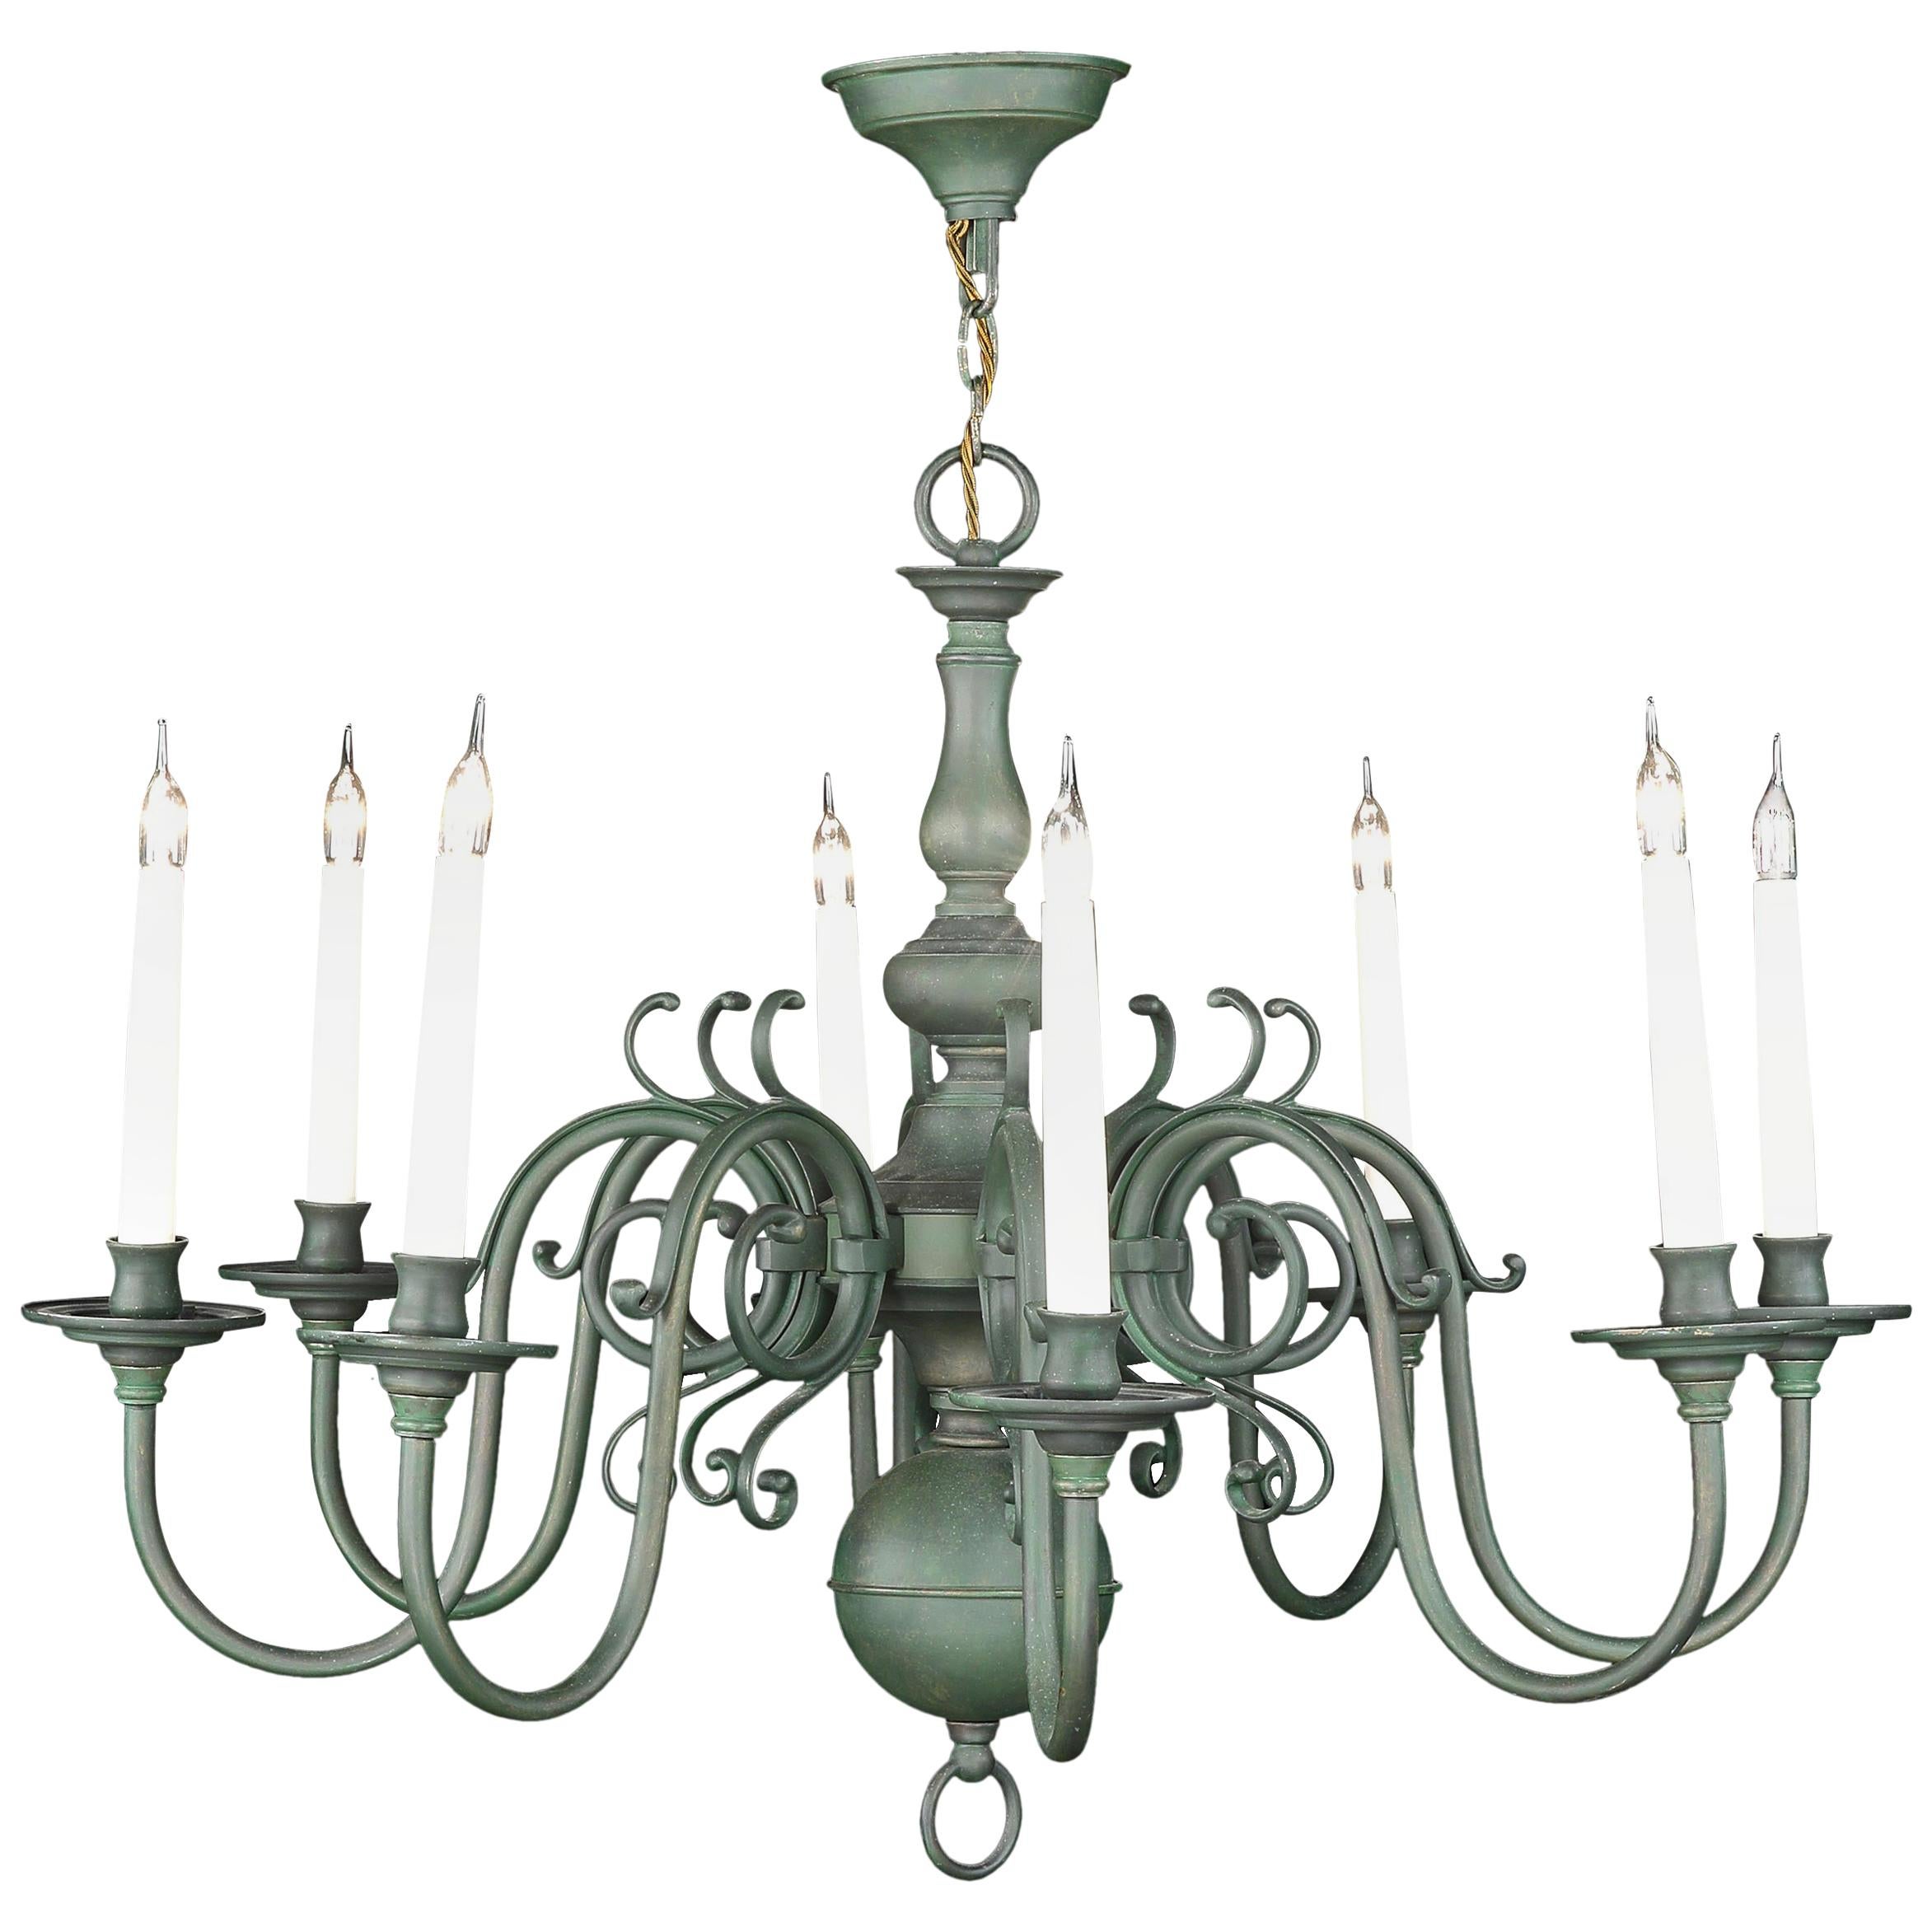 Chandelier Brass Painted Green 8-Arm Electrified Candle Lamp Baroque Dutch